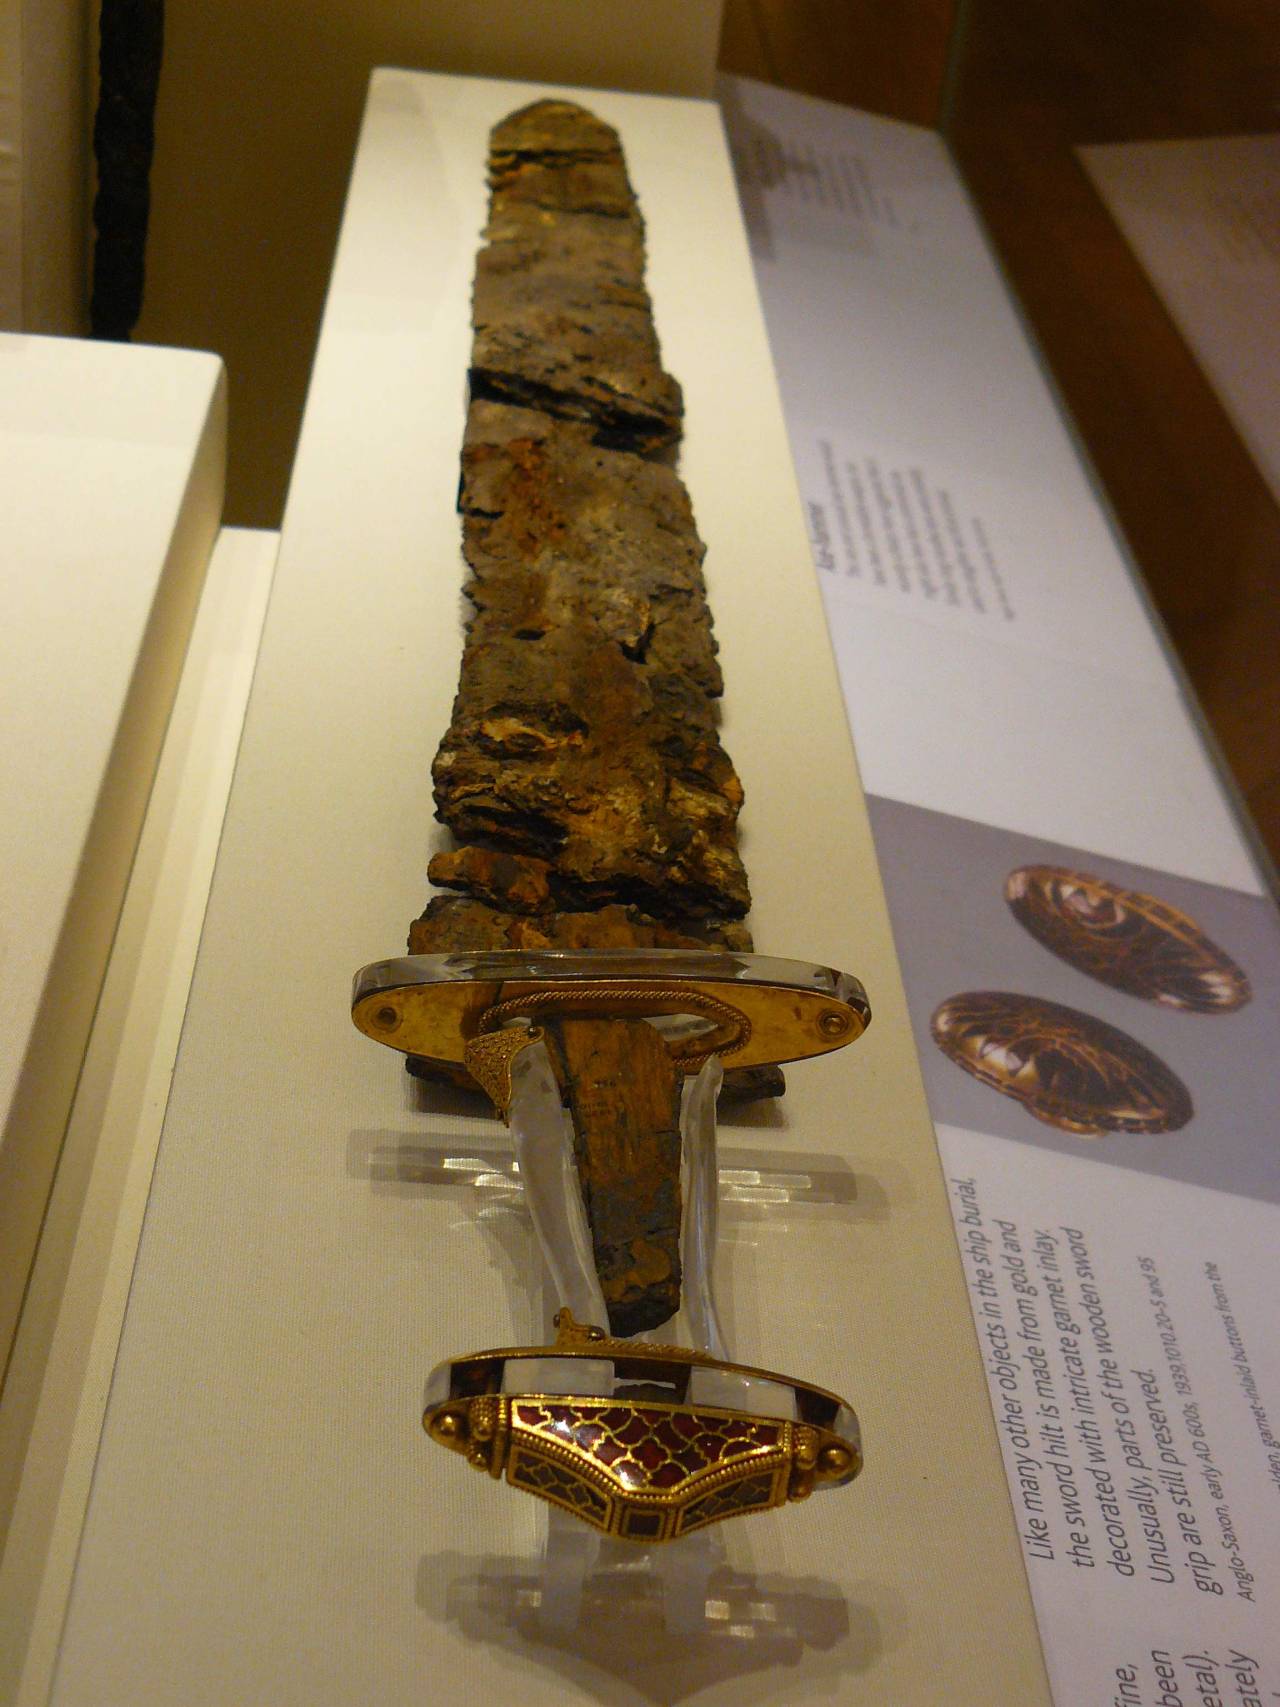 Sword from the Anglo-Saxon Sutton Hoo ship-burial, dates to approximately AD 620. Suffolk, England.
This sword is one of the many artifacts discovered in the Sutton Hoo ship-burial, which is thought to have belonged to one of four East Anglian kings:...